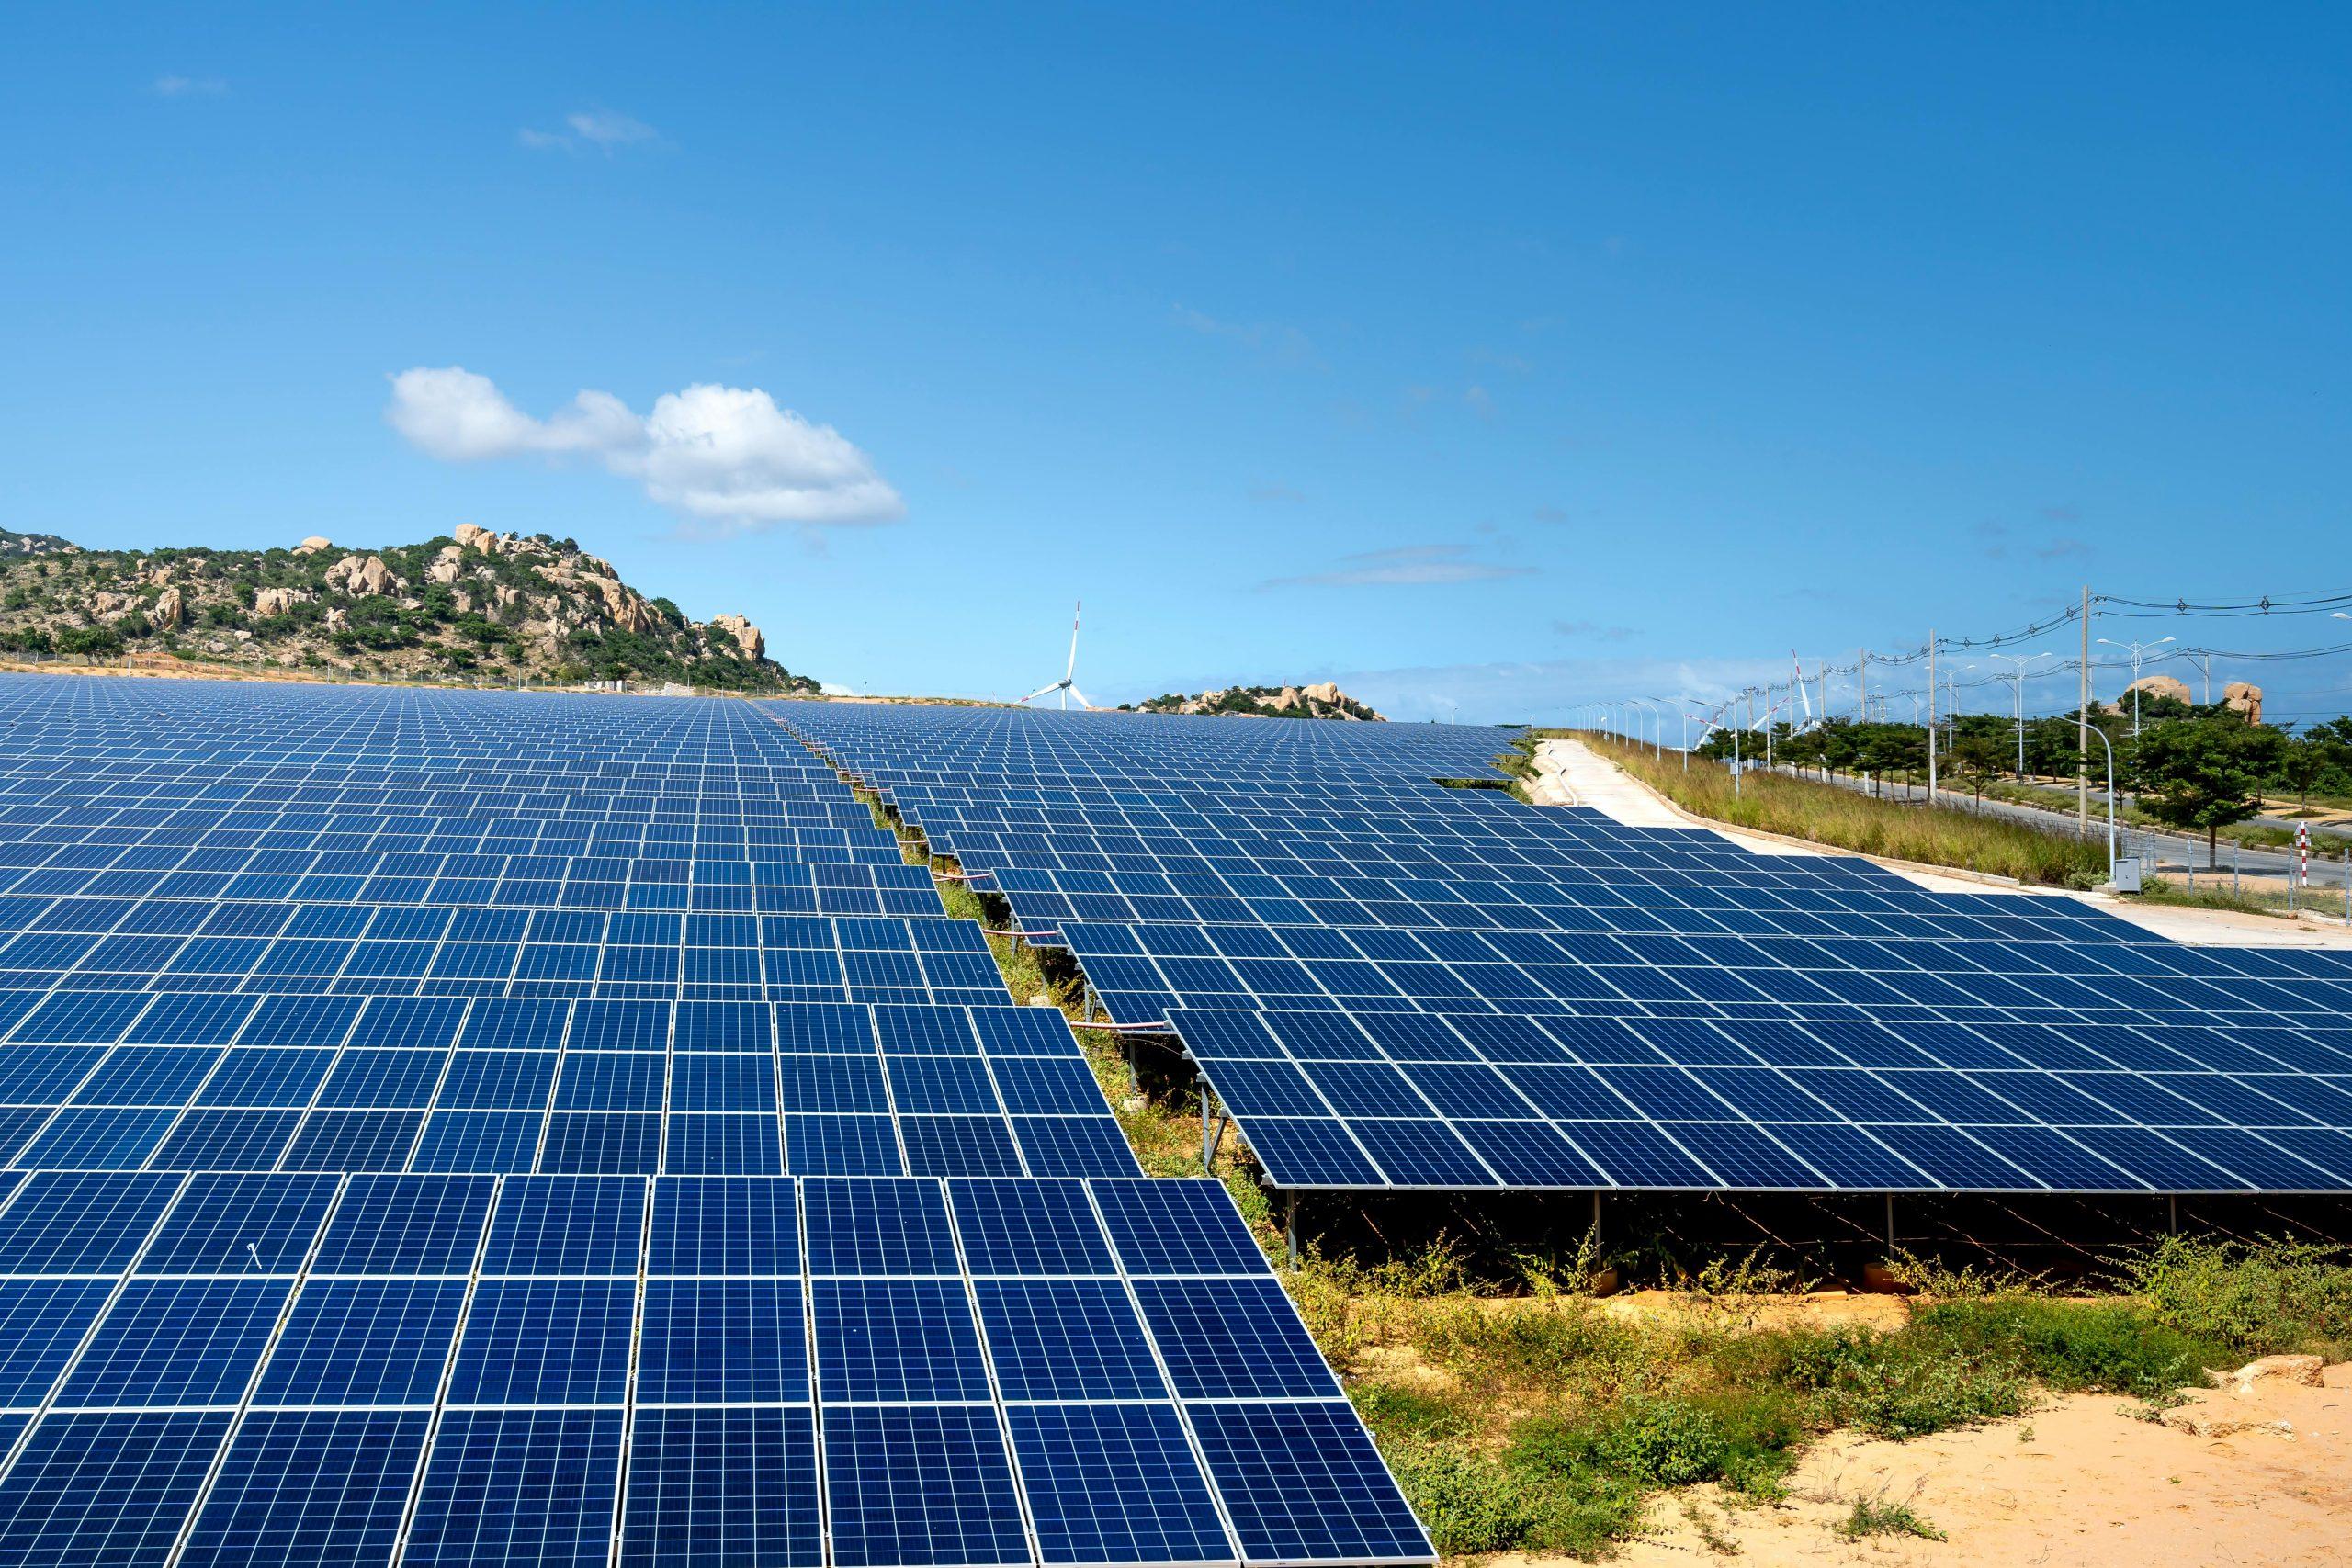 STOP AI PANNELLI FOTOVOLTAICI SULLE AREE AGRICOLE